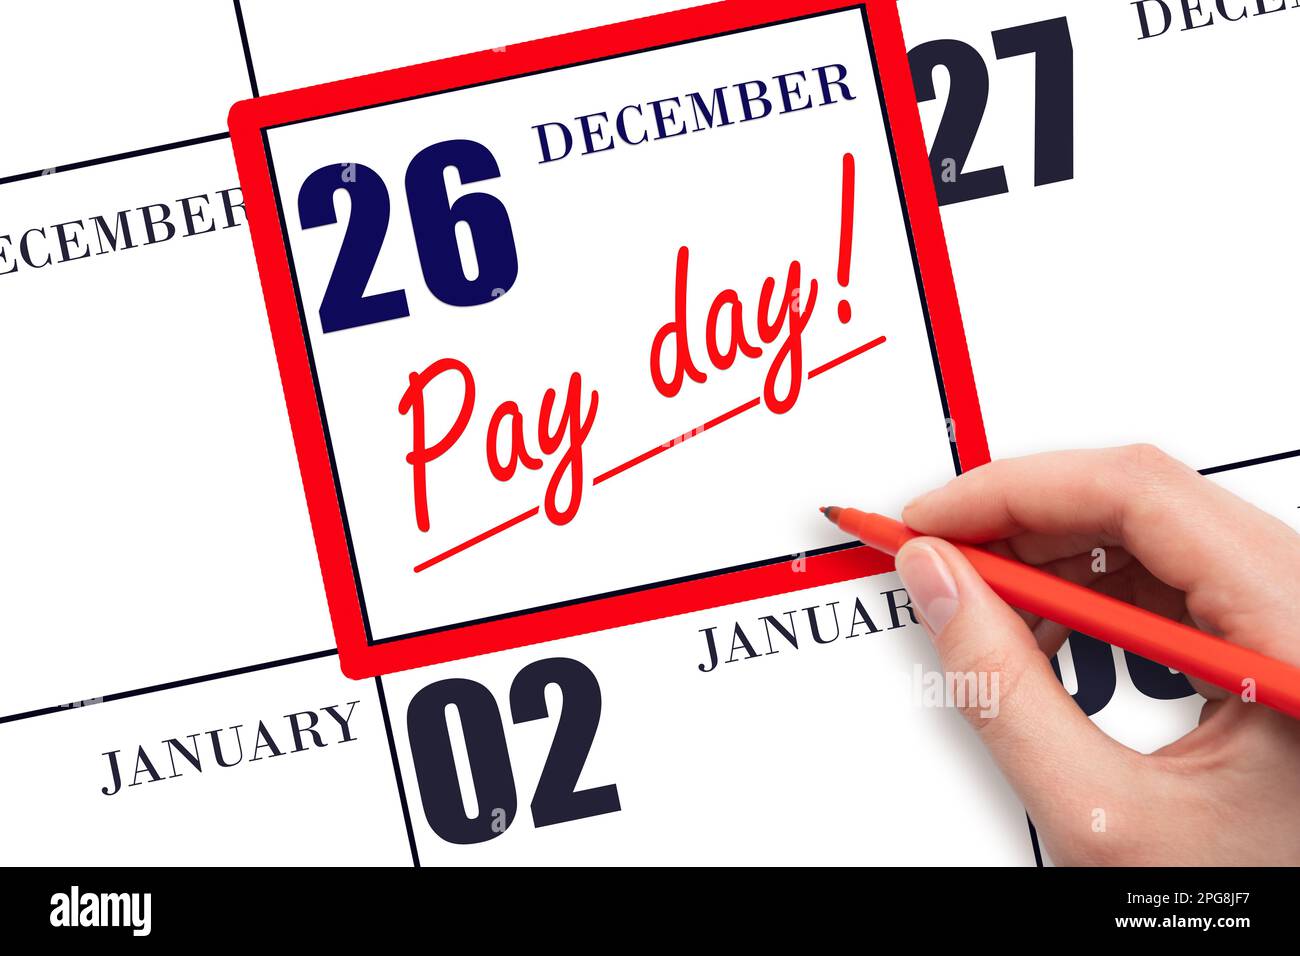 26th day of December. Hand writing text PAY DATE on calendar date December 26 and underline it. Payment due date. Reminder concept of payment. Winter Stock Photo